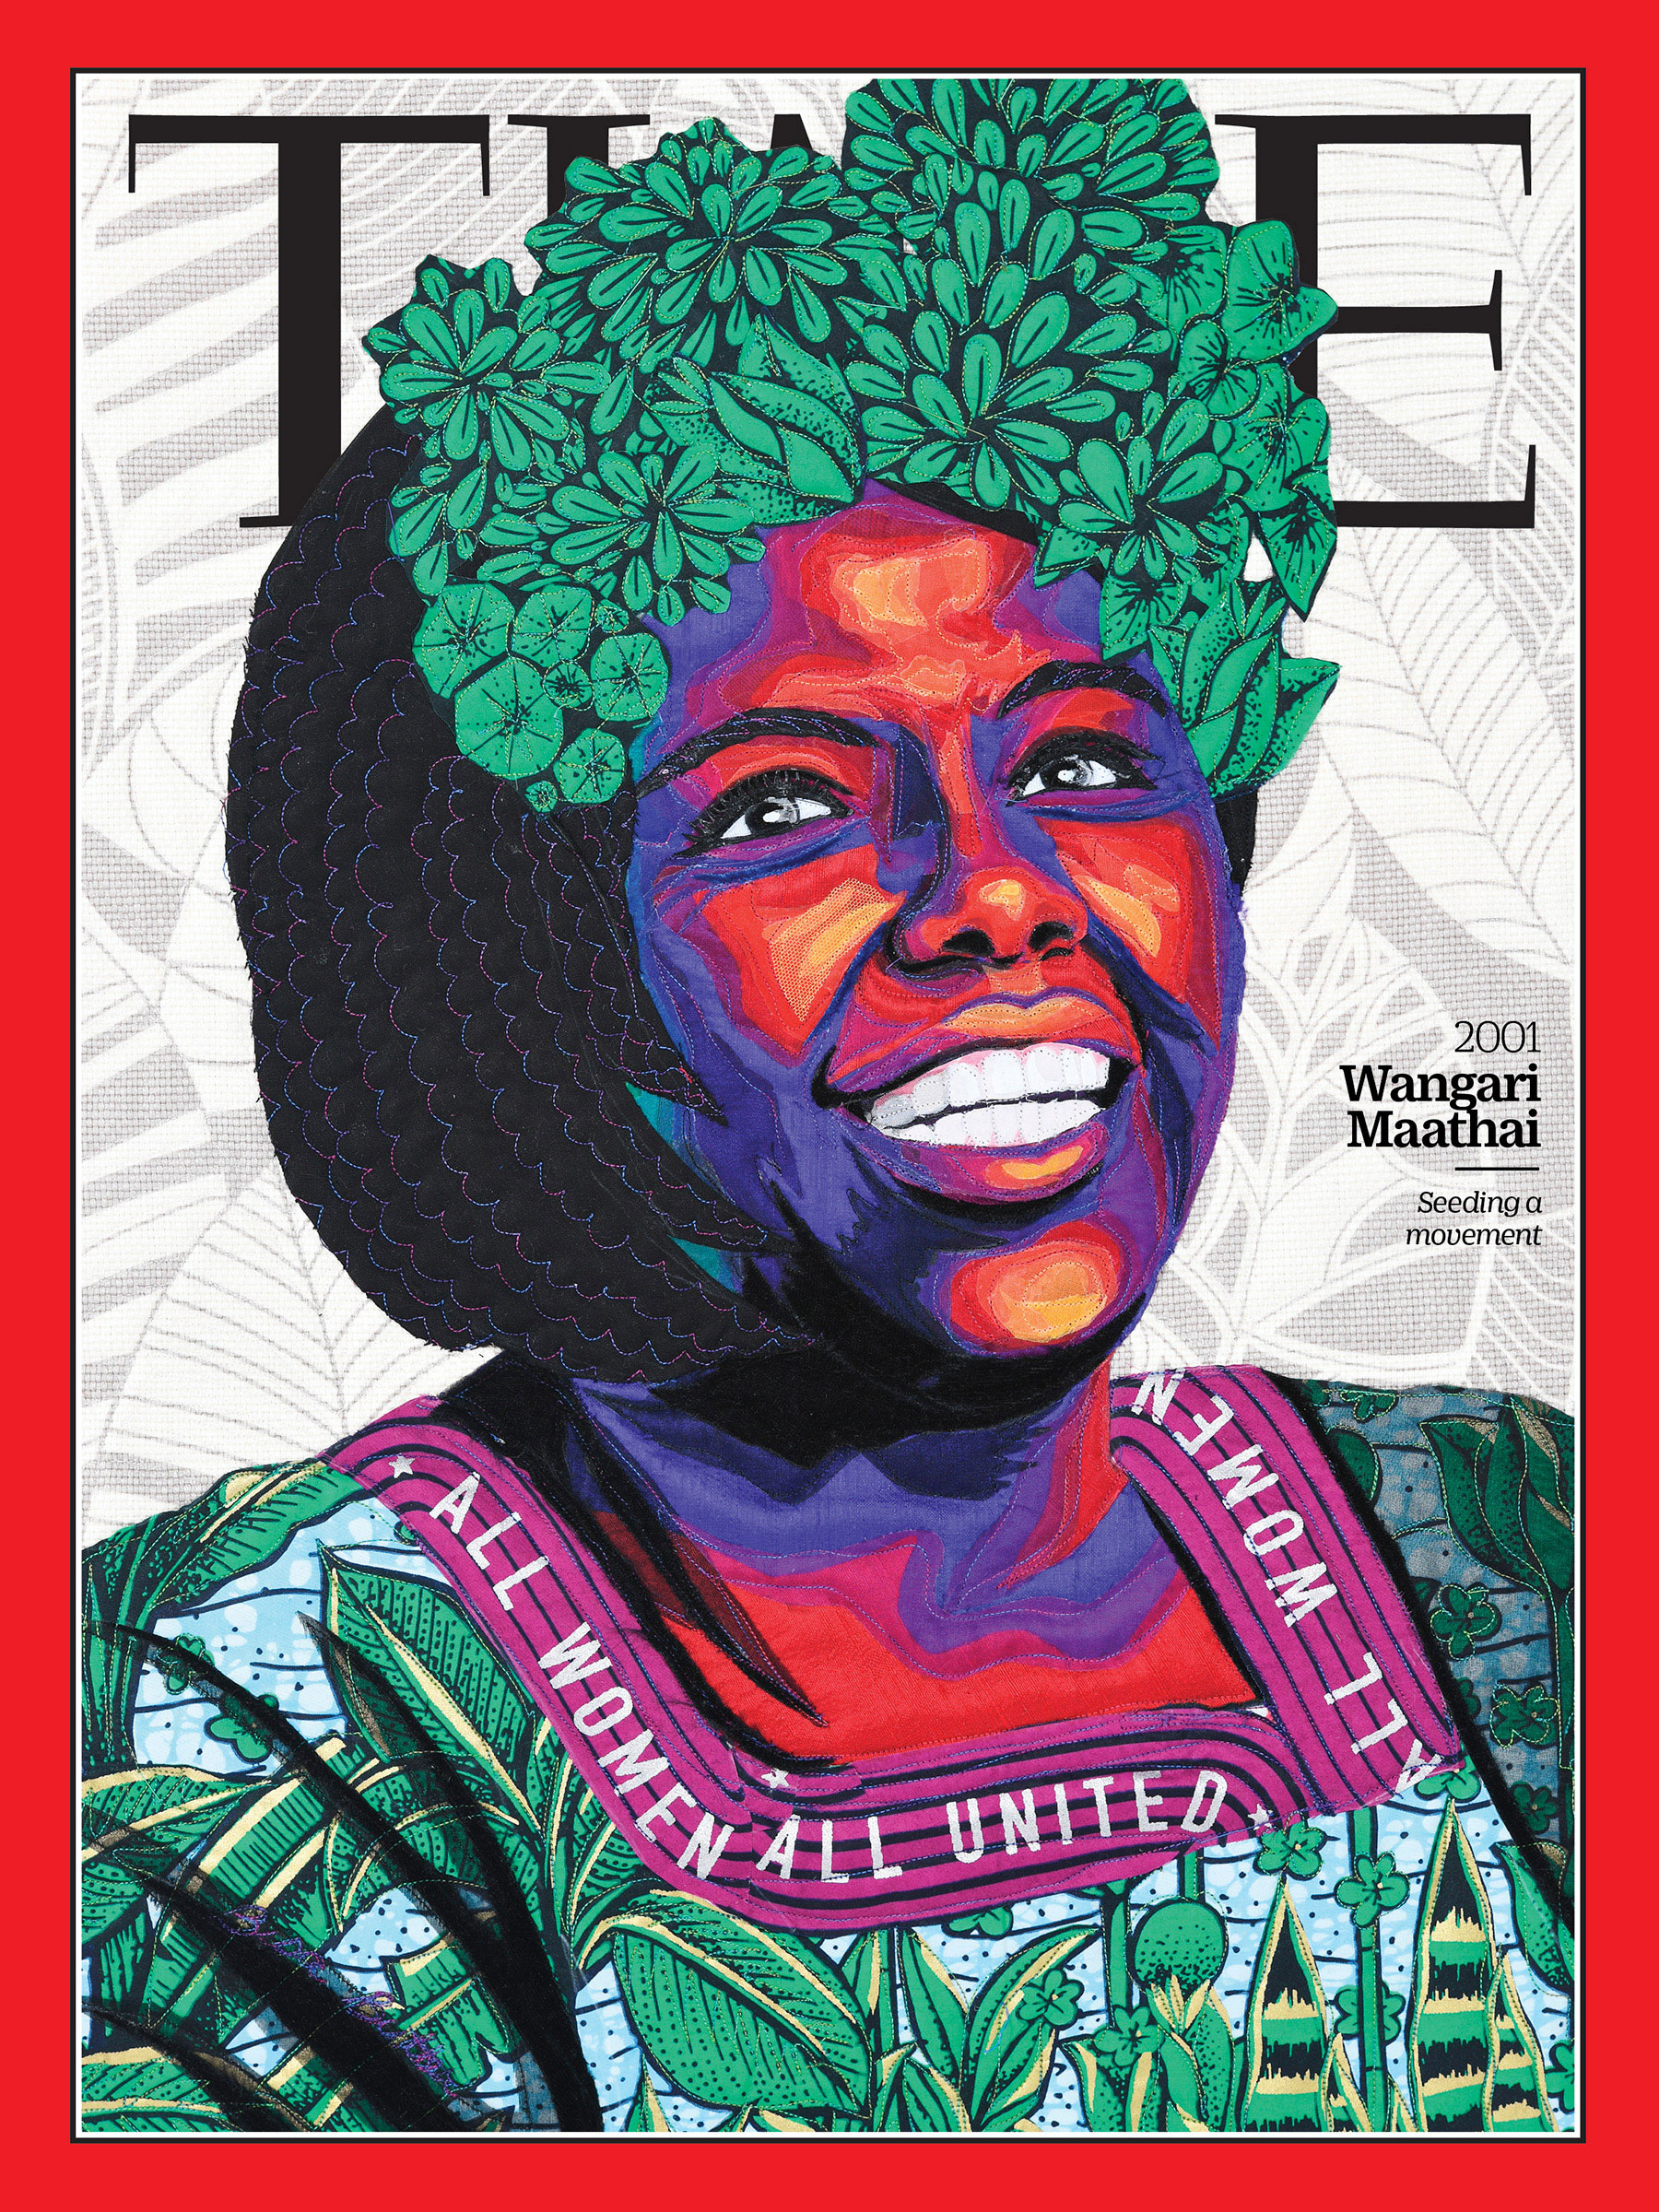 <a href="https://fineartamerica.com/featured/wangari-maathai-2001-time.html"><strong>Buy the cover art→</strong></a> (Art by Bisa Butler for TIME; Clemens Scharre—The Right Livelihood Foundation)